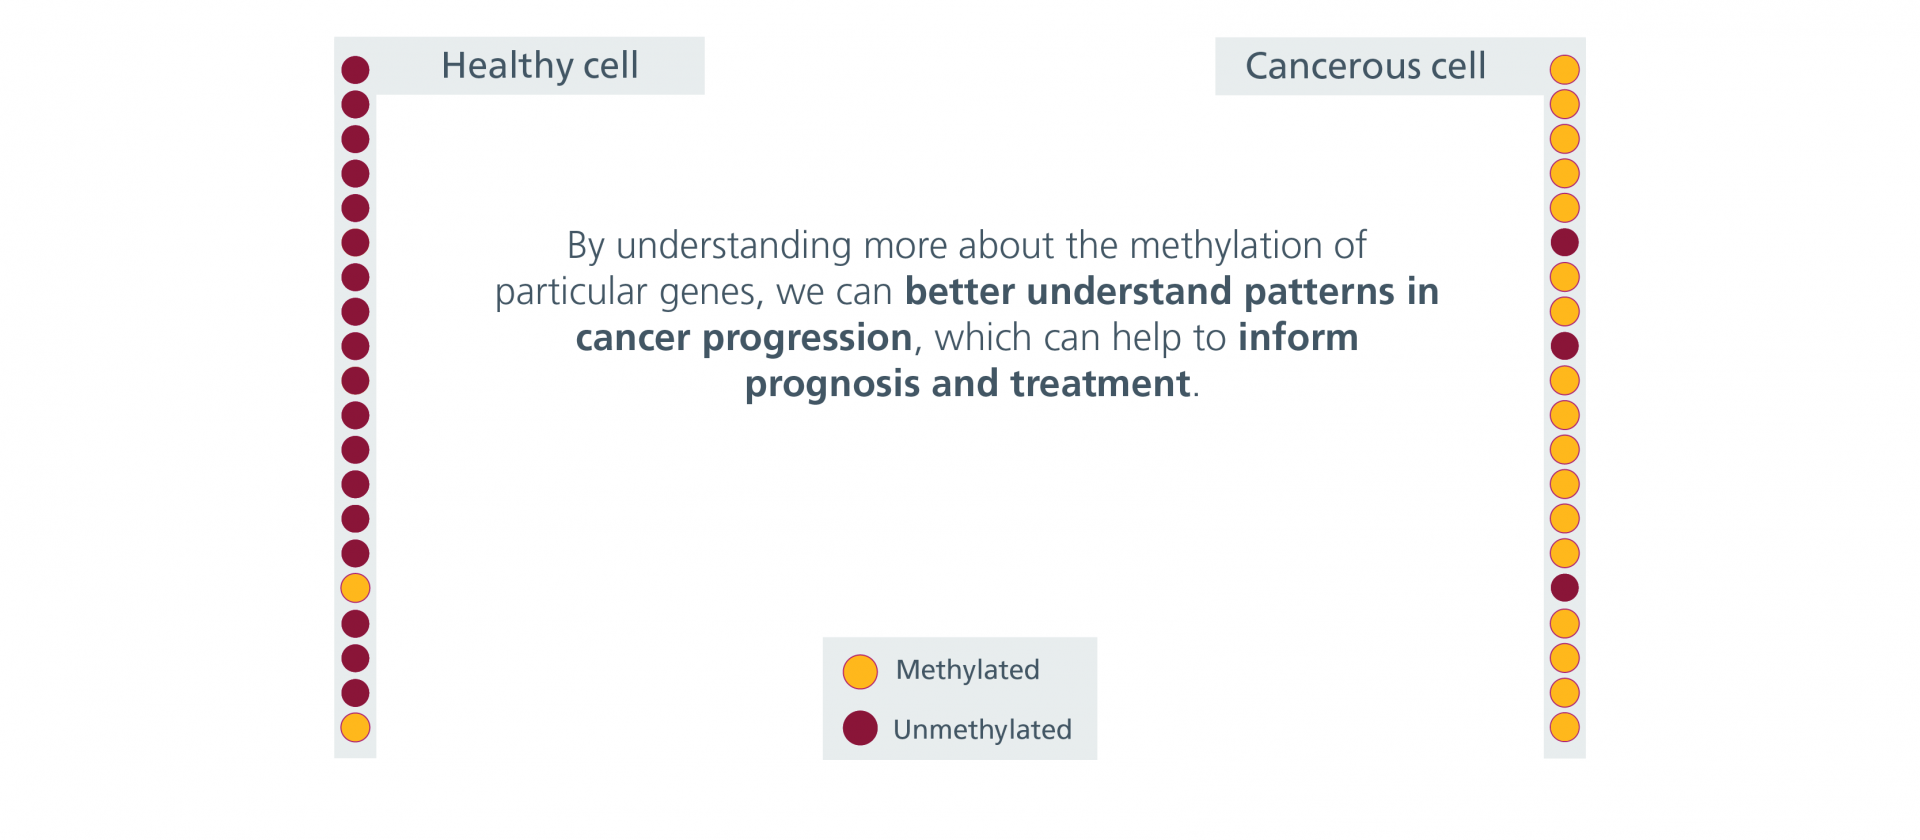 A comparison of the methylation status of 20 genes in a healthy cell and the same 20 genes in a cancerous cell; there is a significant difference between the two. By better understanding patterns in cancer progression, we may be able to help inform prognosis and treatment.